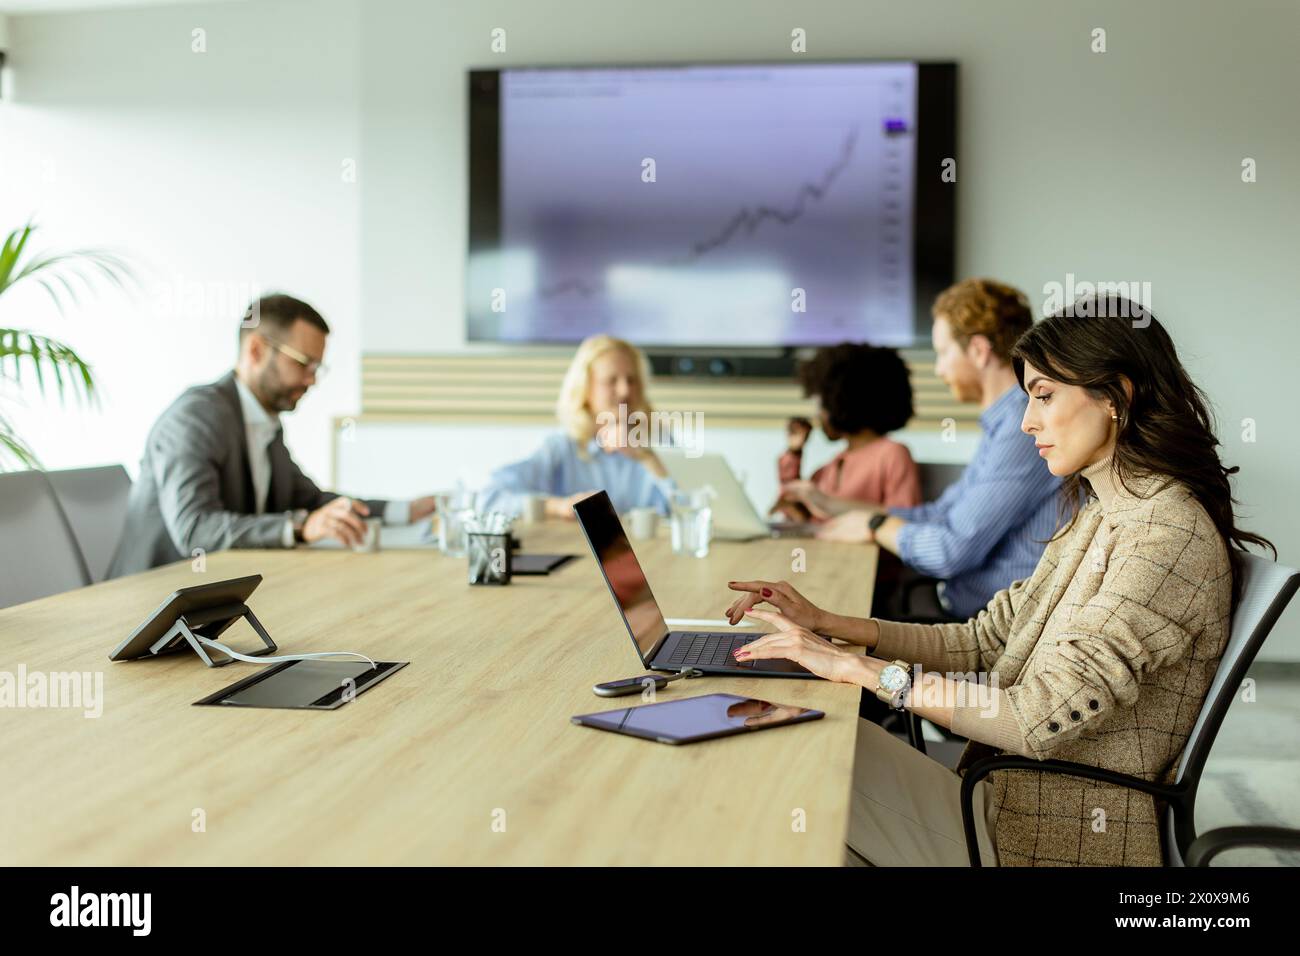 A professional team analyzes growth trends in a modern conference room with a digital display. Stock Photo